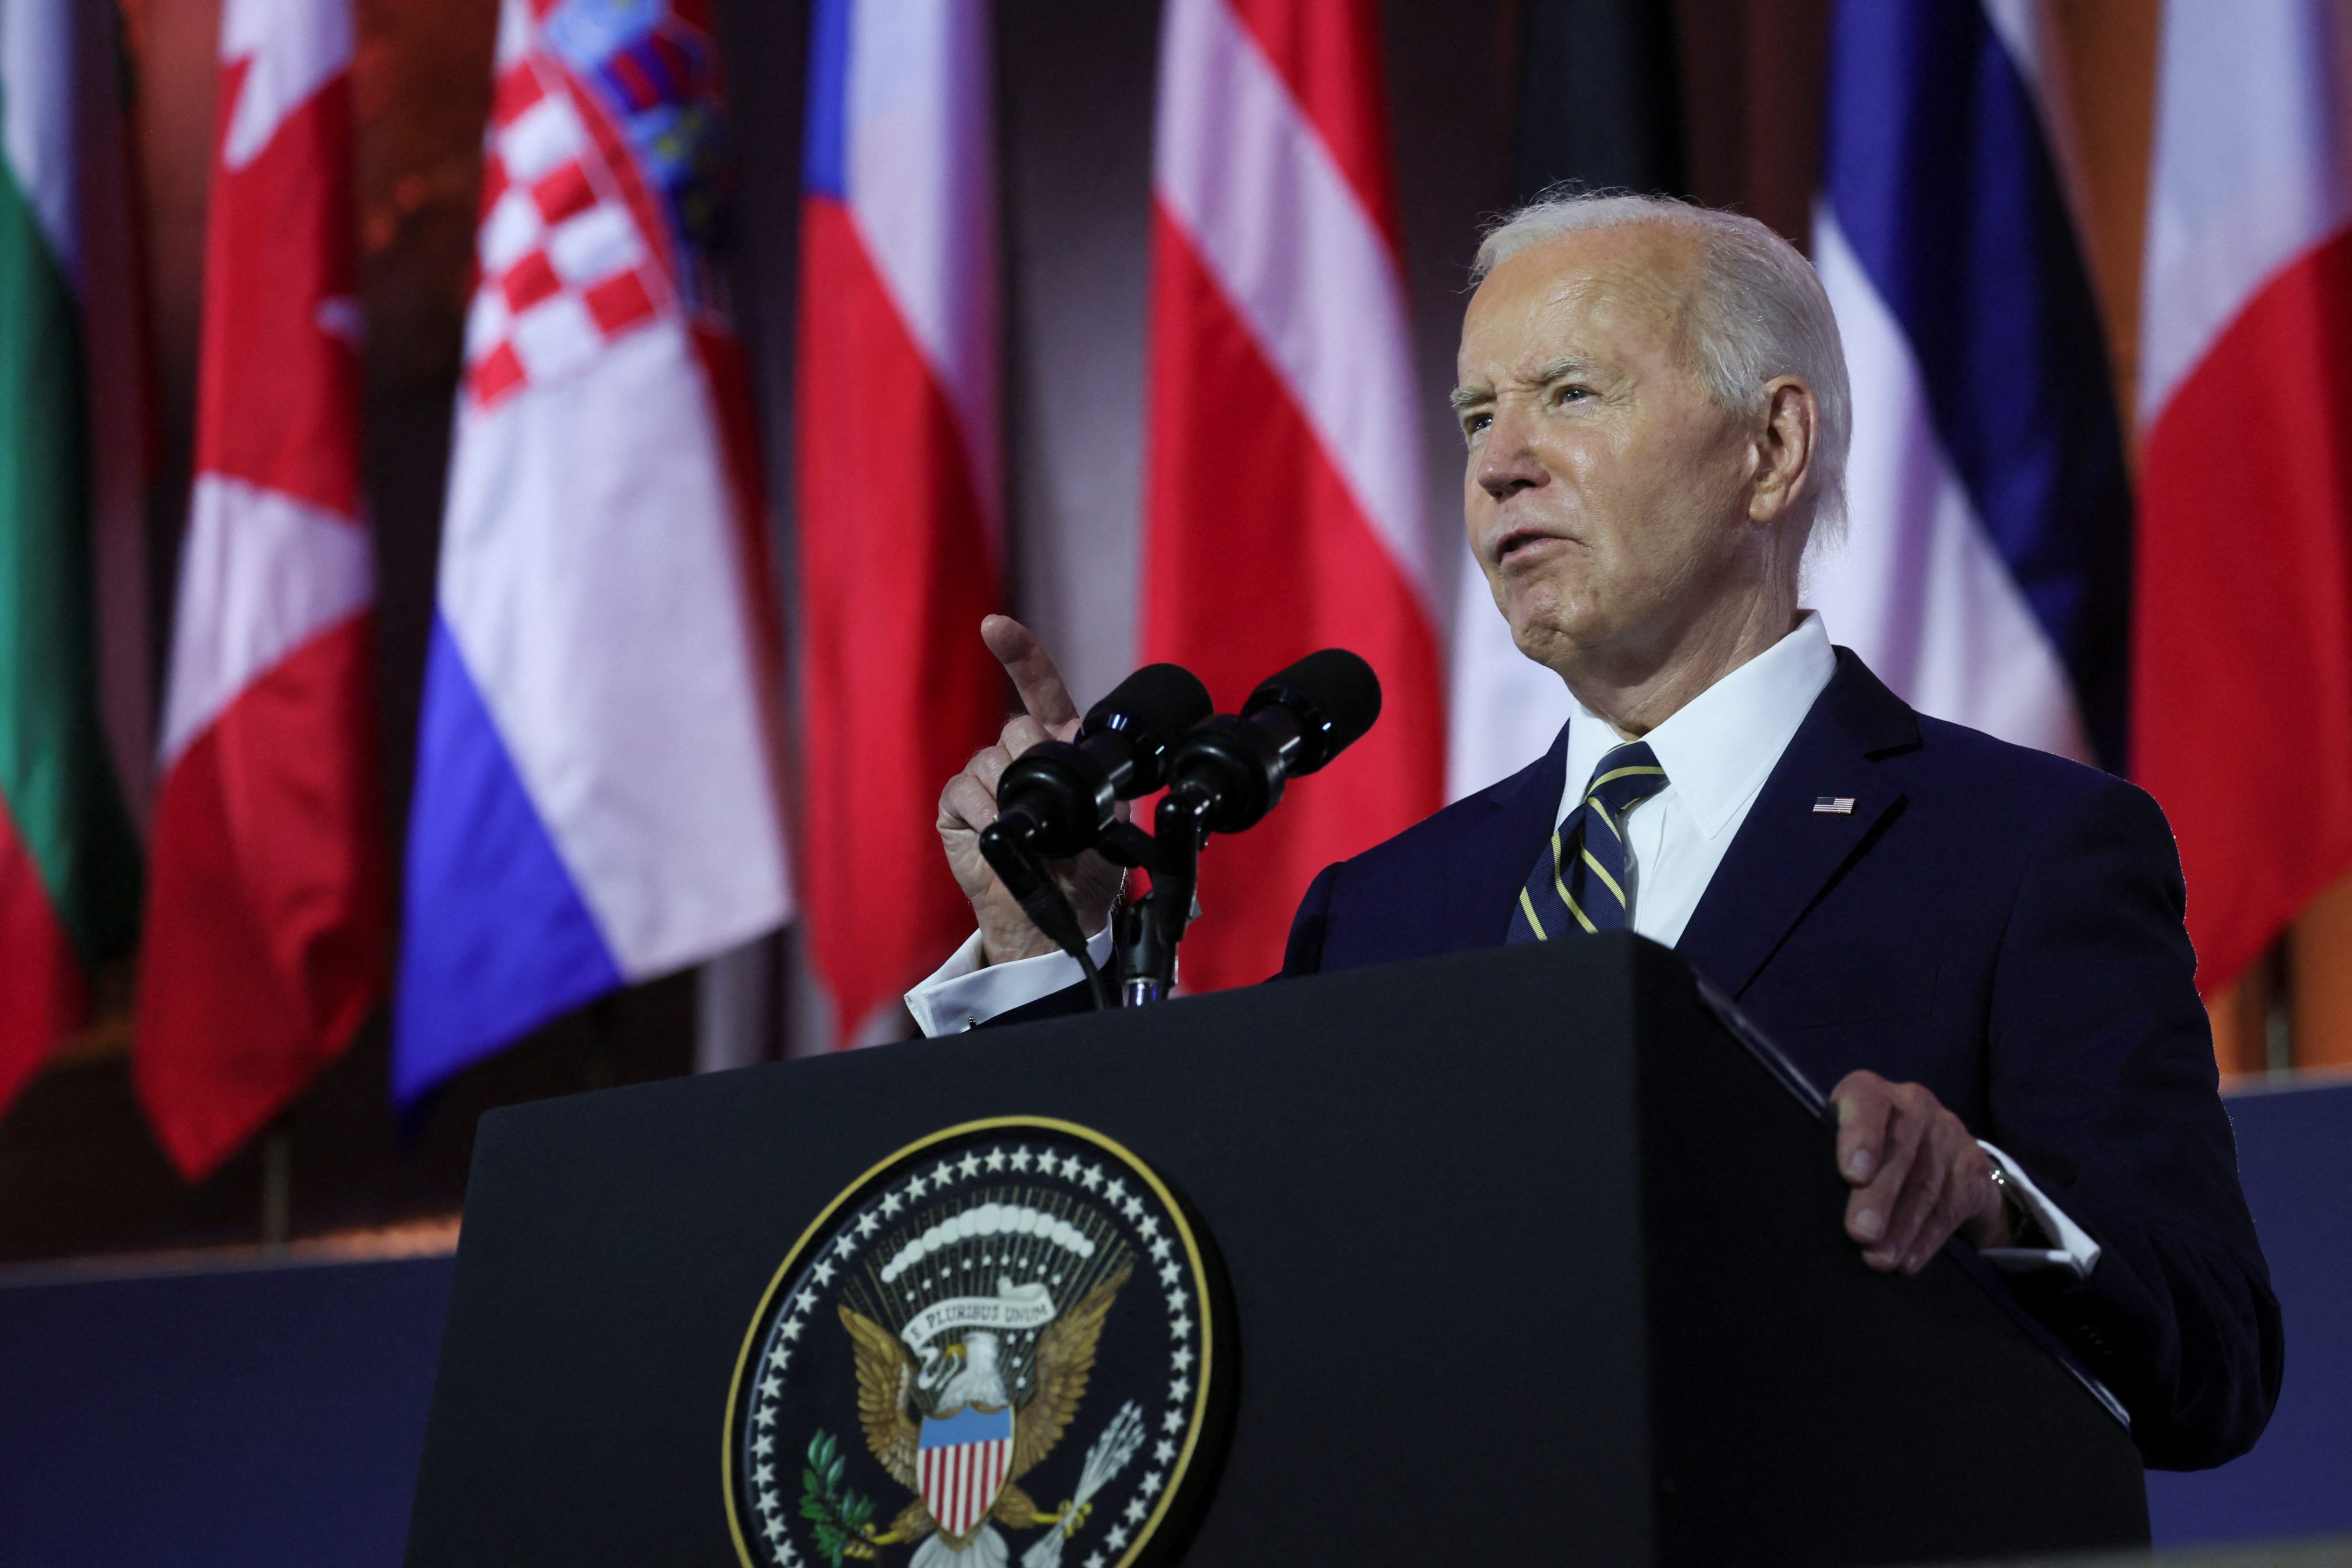 US President Joe Biden delivers remarks at a Nato event in Washington on Tuesday. Photo: Reuters